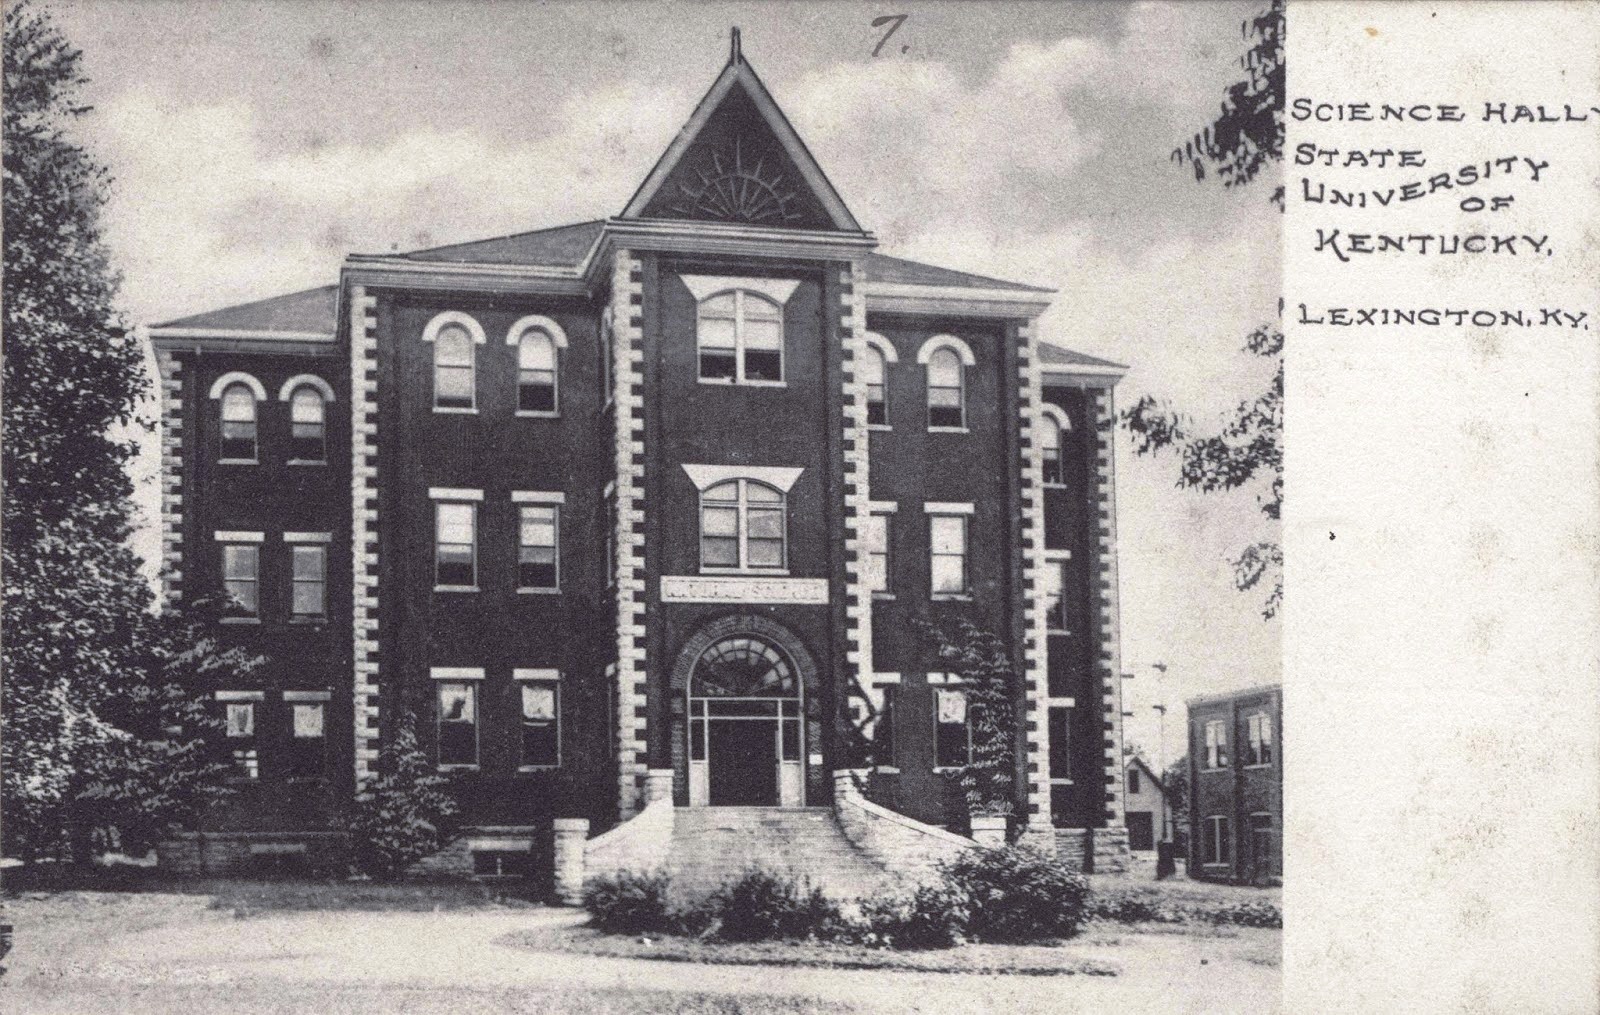 Completed in 1898 as Science Hall, Miller Hall is one of four 19th century buildings still standing on the UK campus. It is located in central campus across the plaza from Patterson Office Tower. Currently, it houses Undergraduate Studies, the Gyula Pauer Cartography Lab, other Department of Geography offices, and School of Architecture studios. Photo courtesy of UK Special Collections.